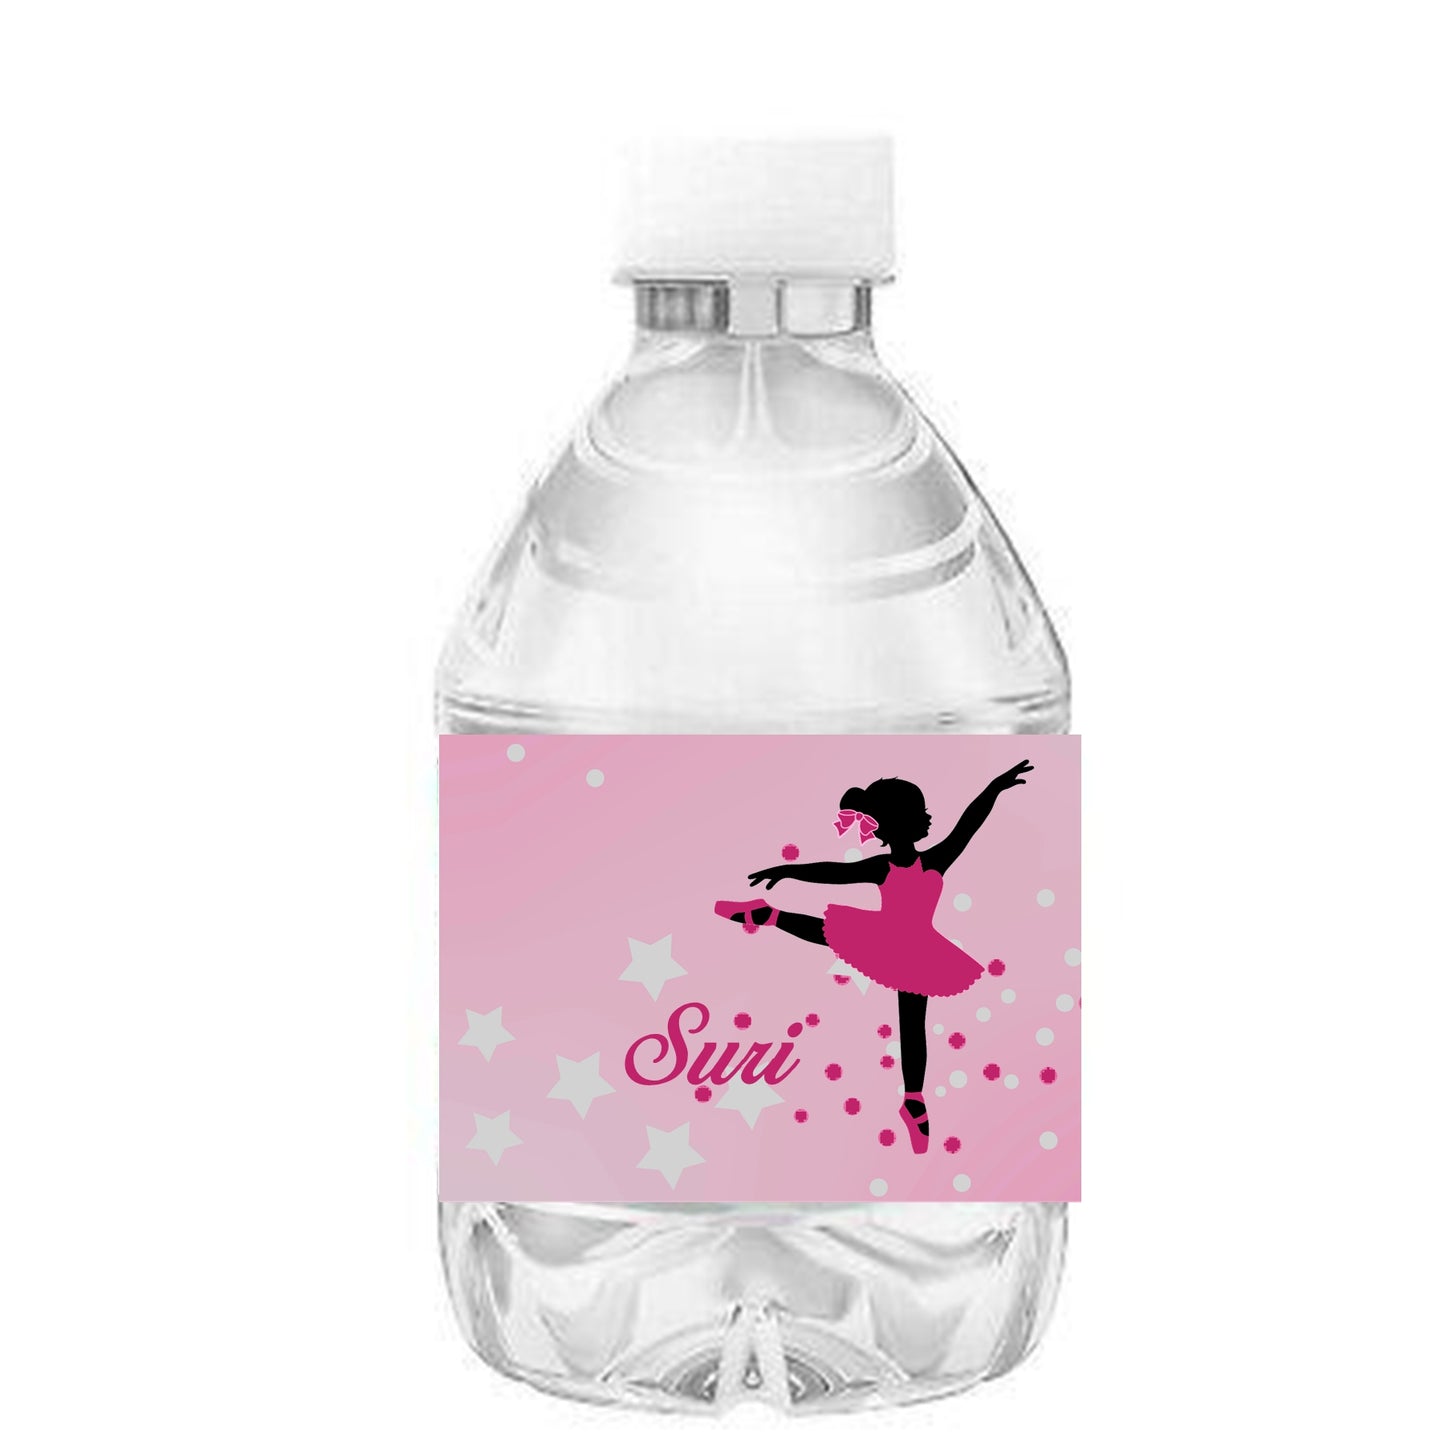 Ballerina Themed Water Bottle with Personalized Label